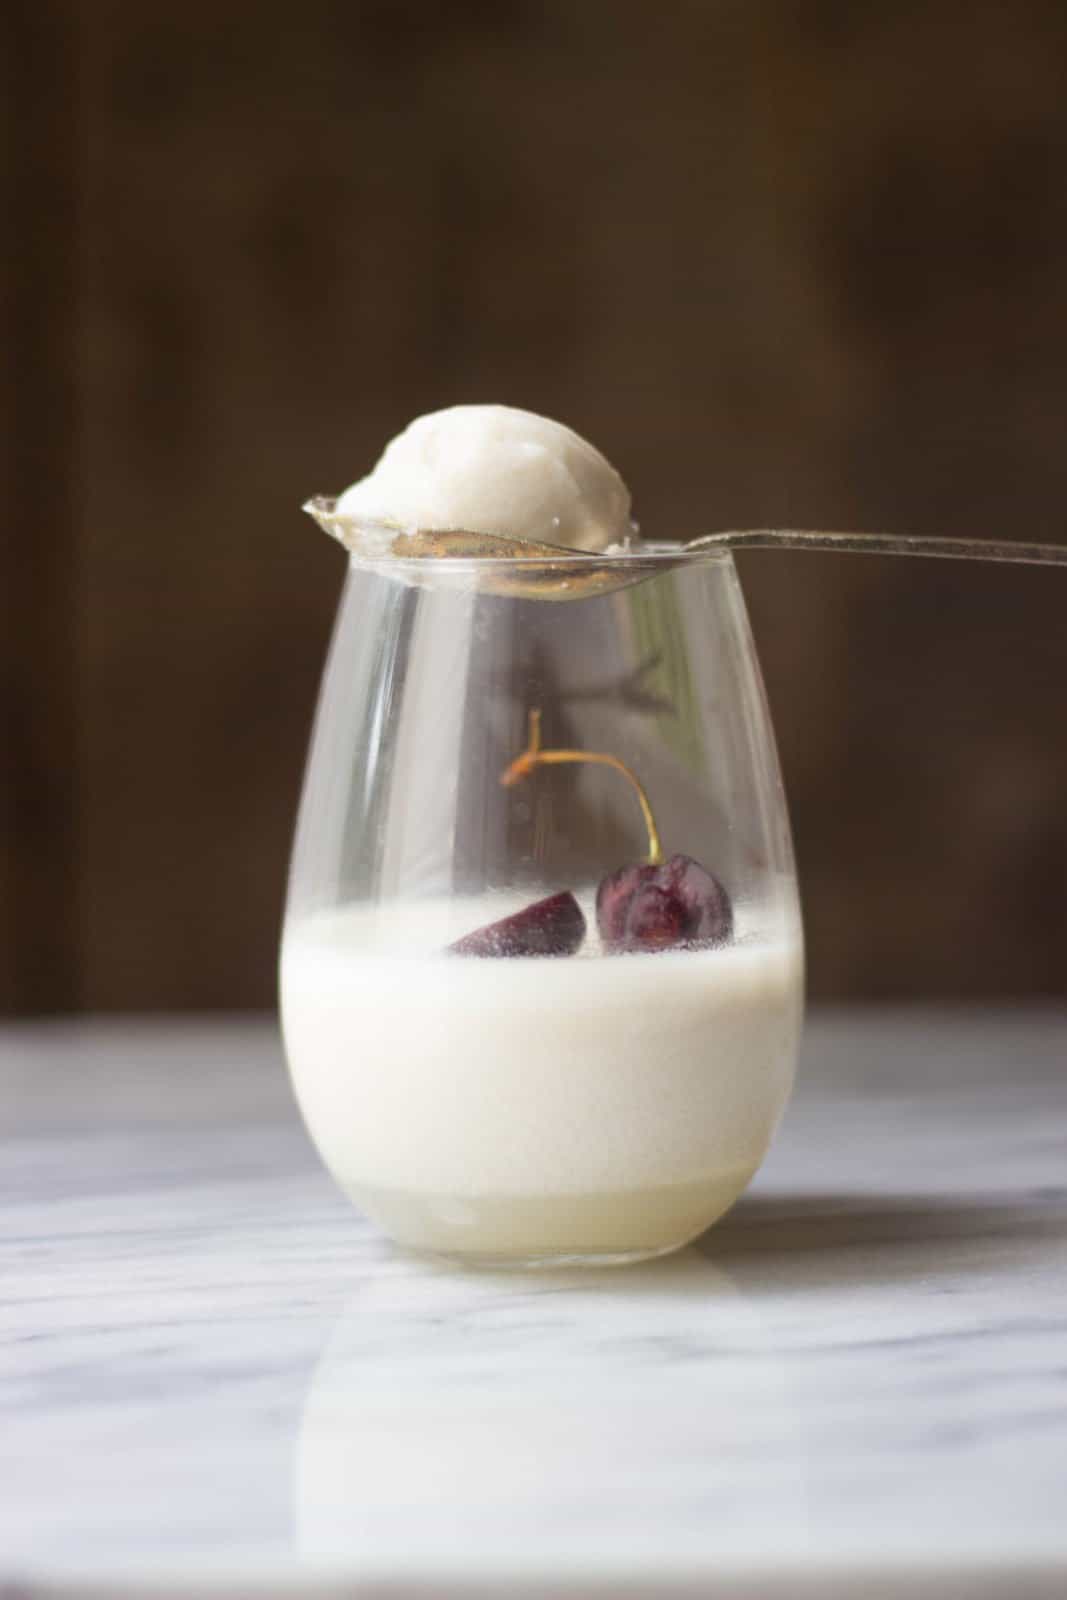 A bite of coconut milk panna cotta on a metal spoon balancing atop of a glass filled with panna cotta.